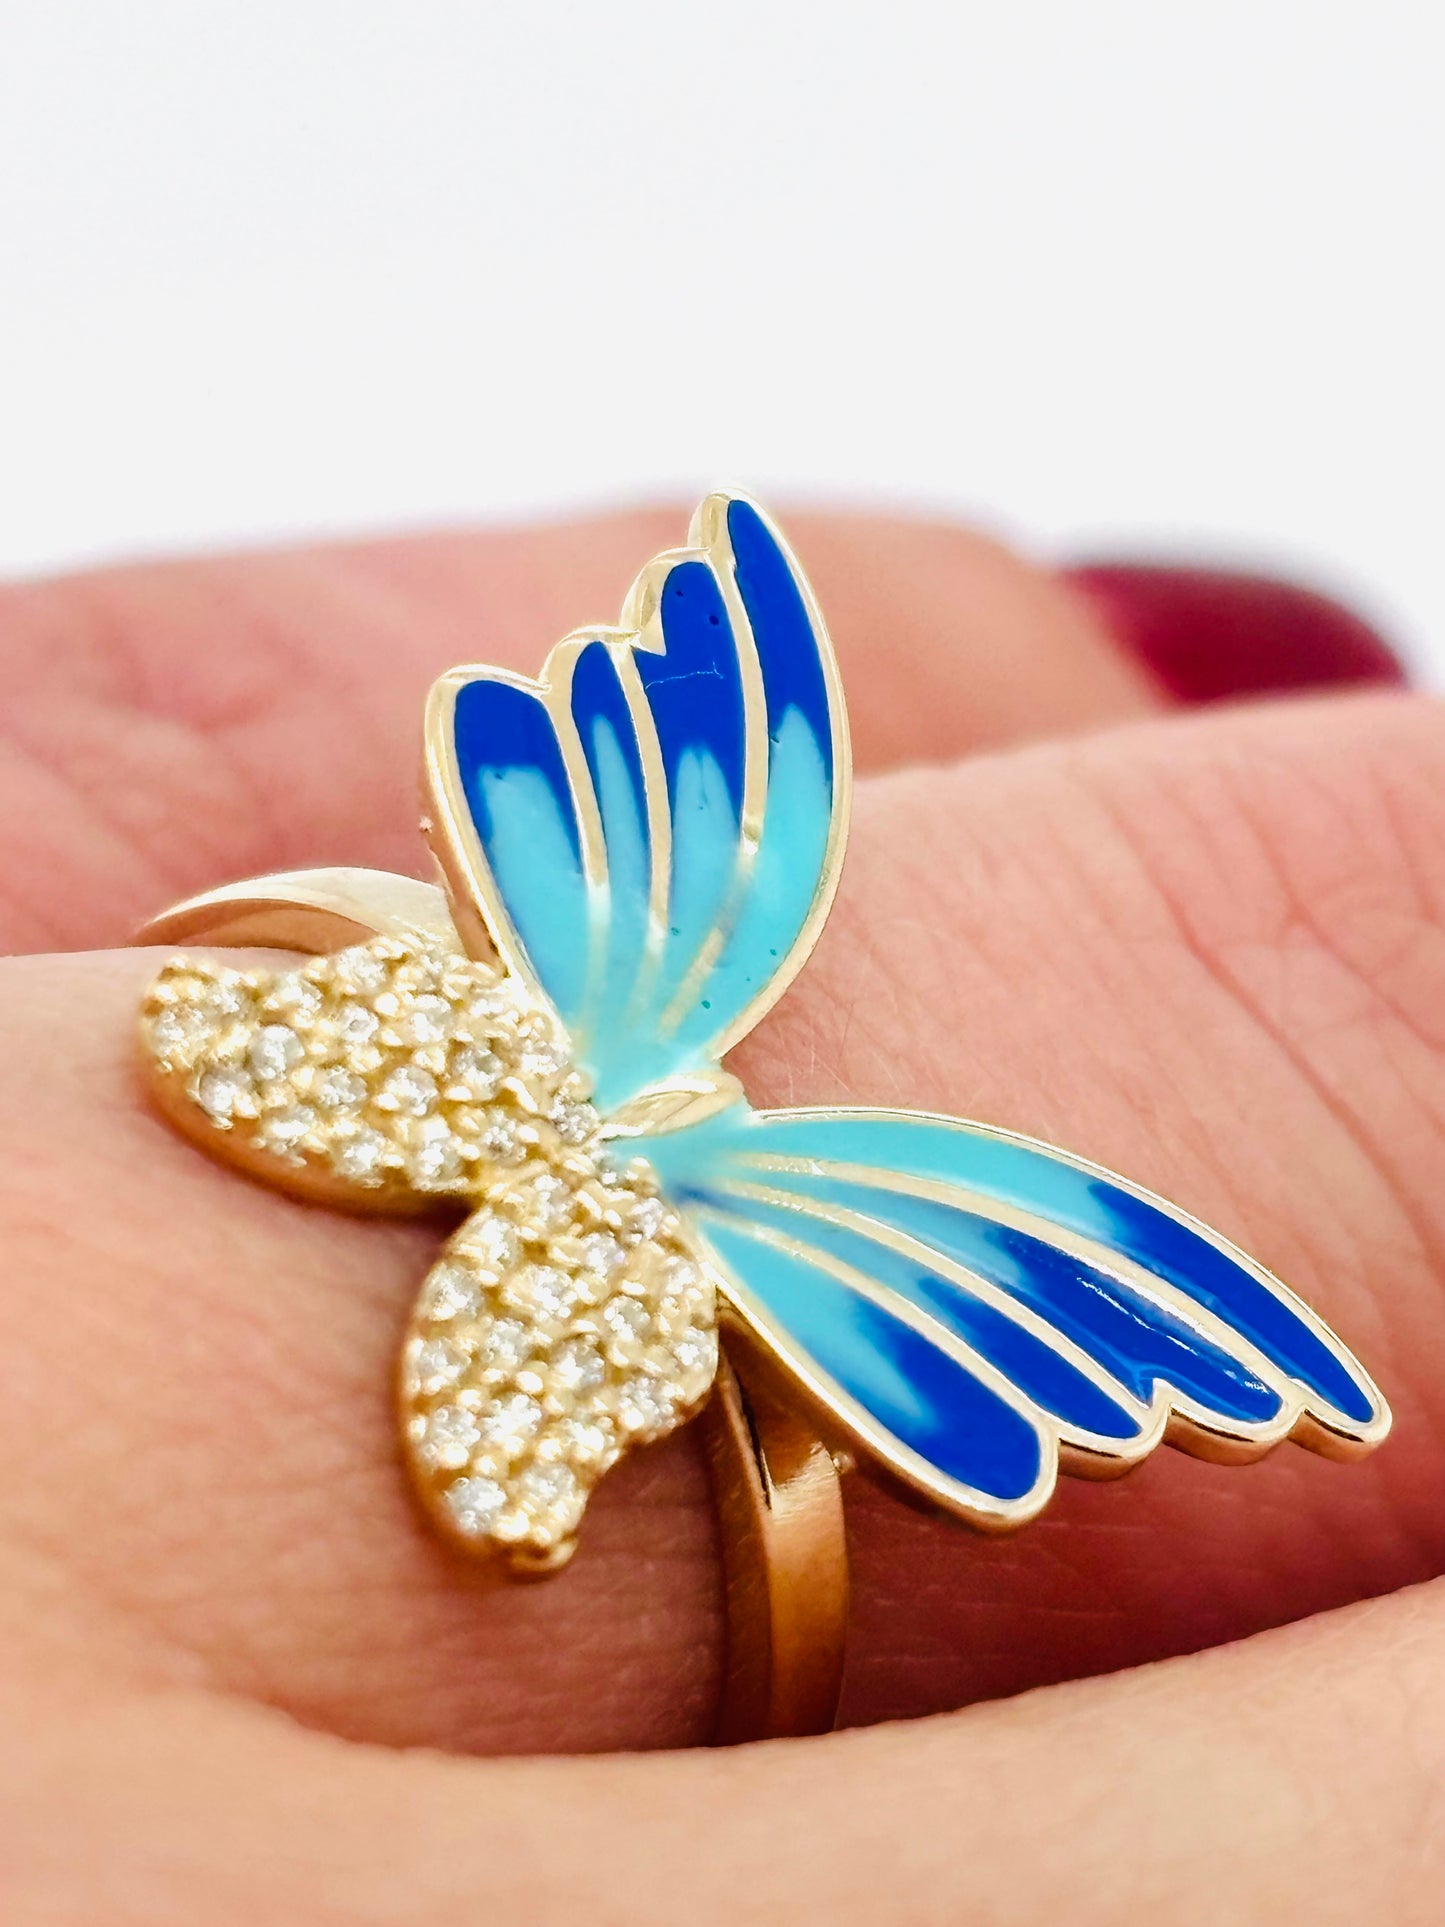 14K Yellow gold two color hand painted blue monarca diamonds butterfly ring-633939